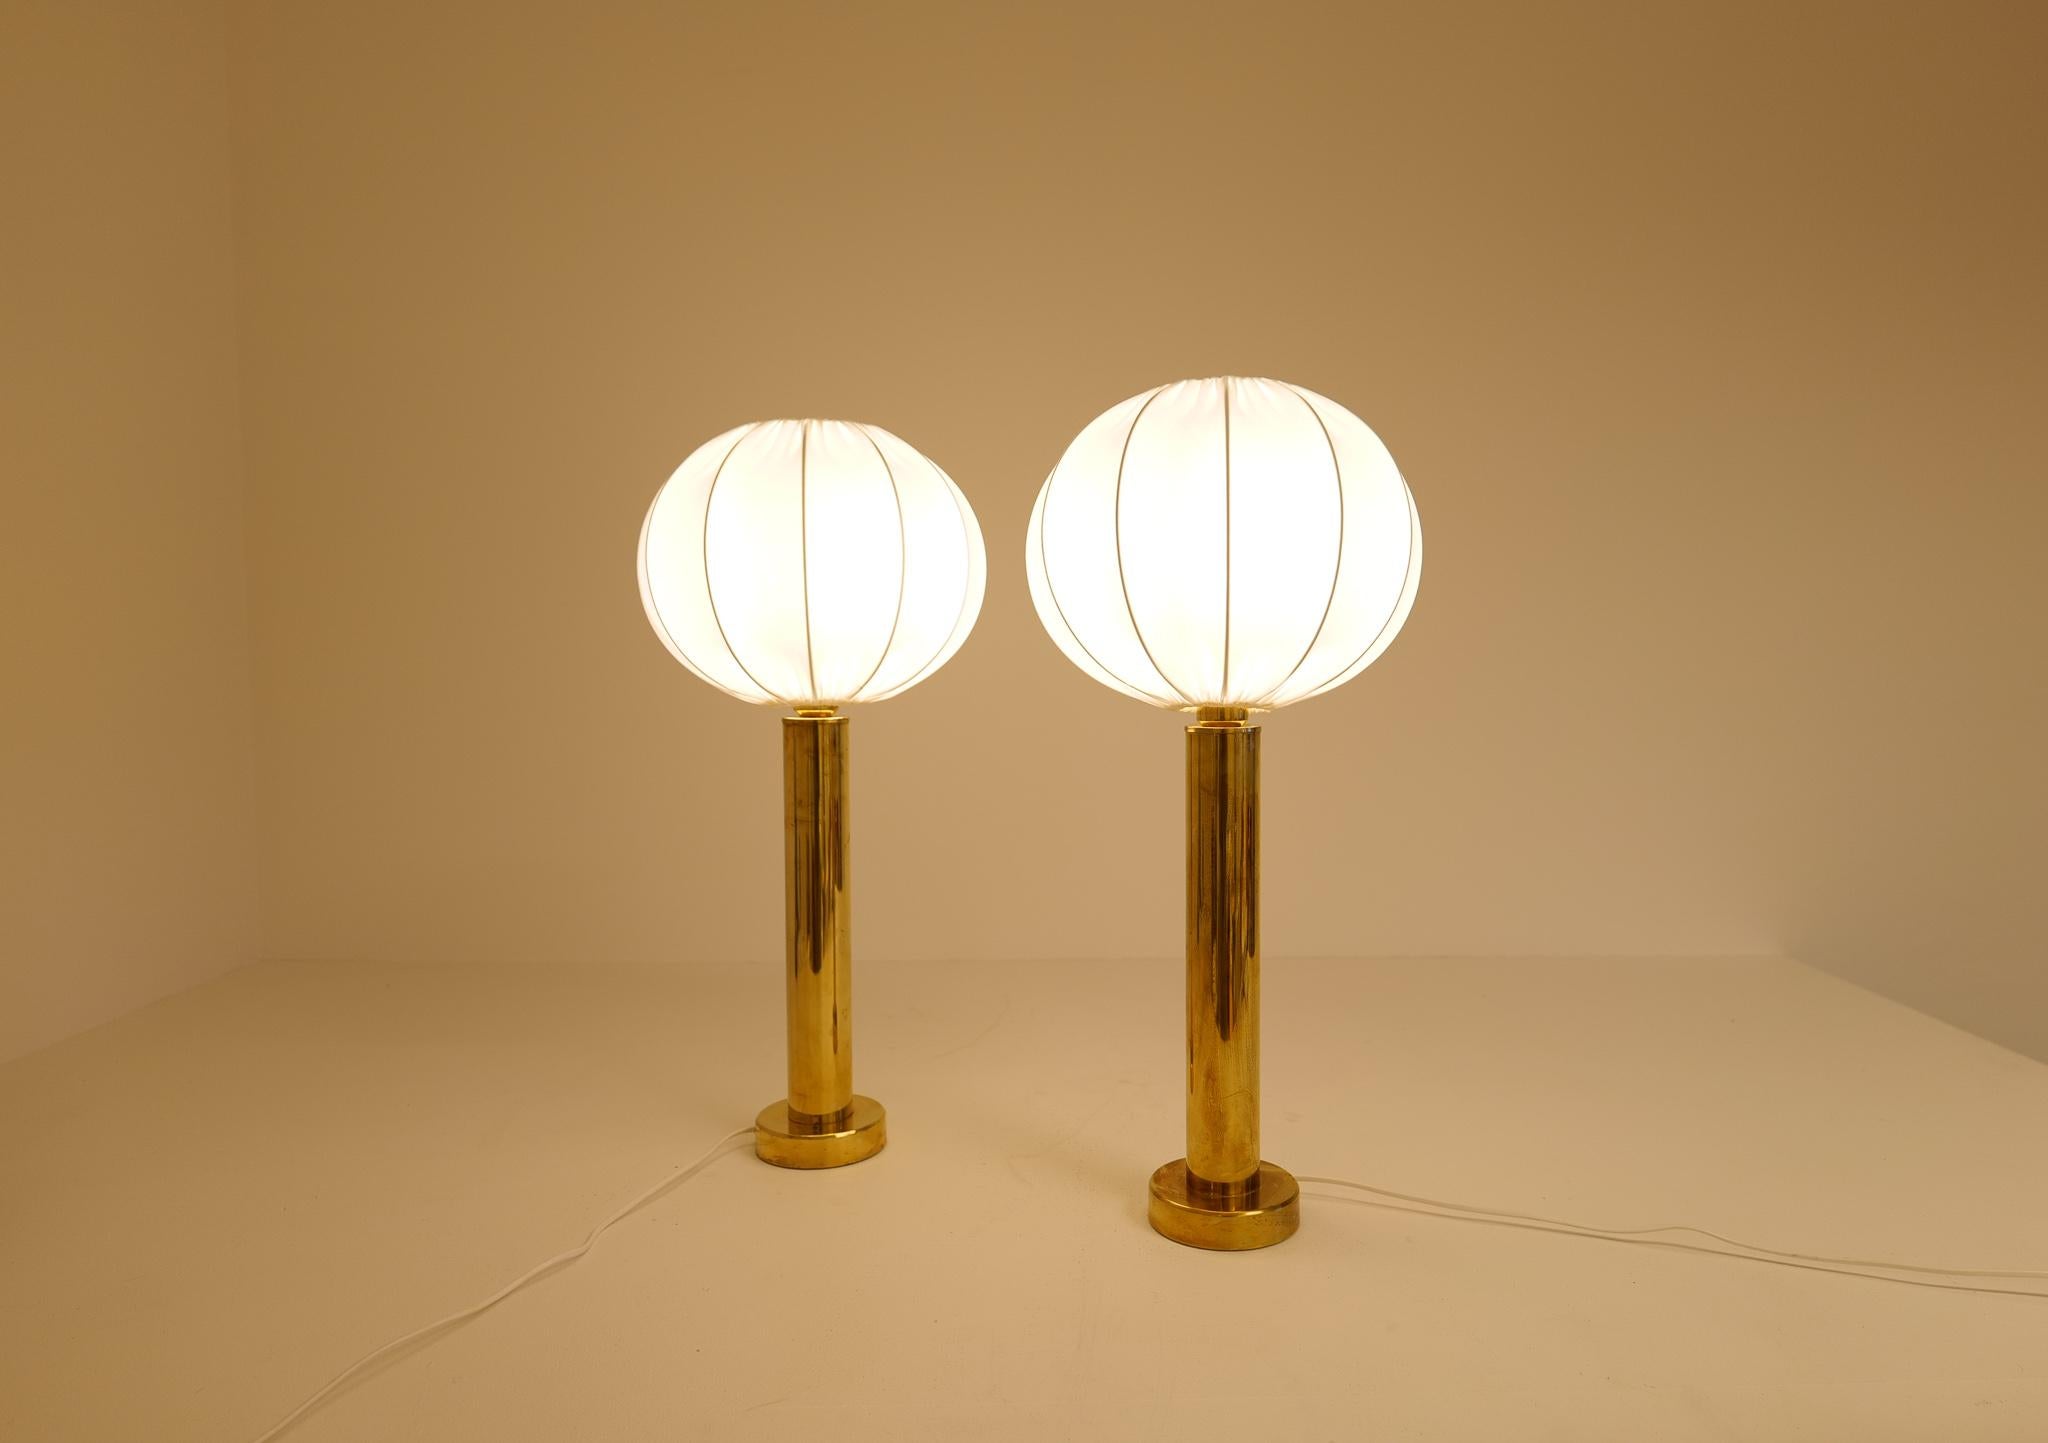 Midcentury Pair of Brass Table Lamps by Kosta Elarmatur, Sweden, 1960s For Sale 7